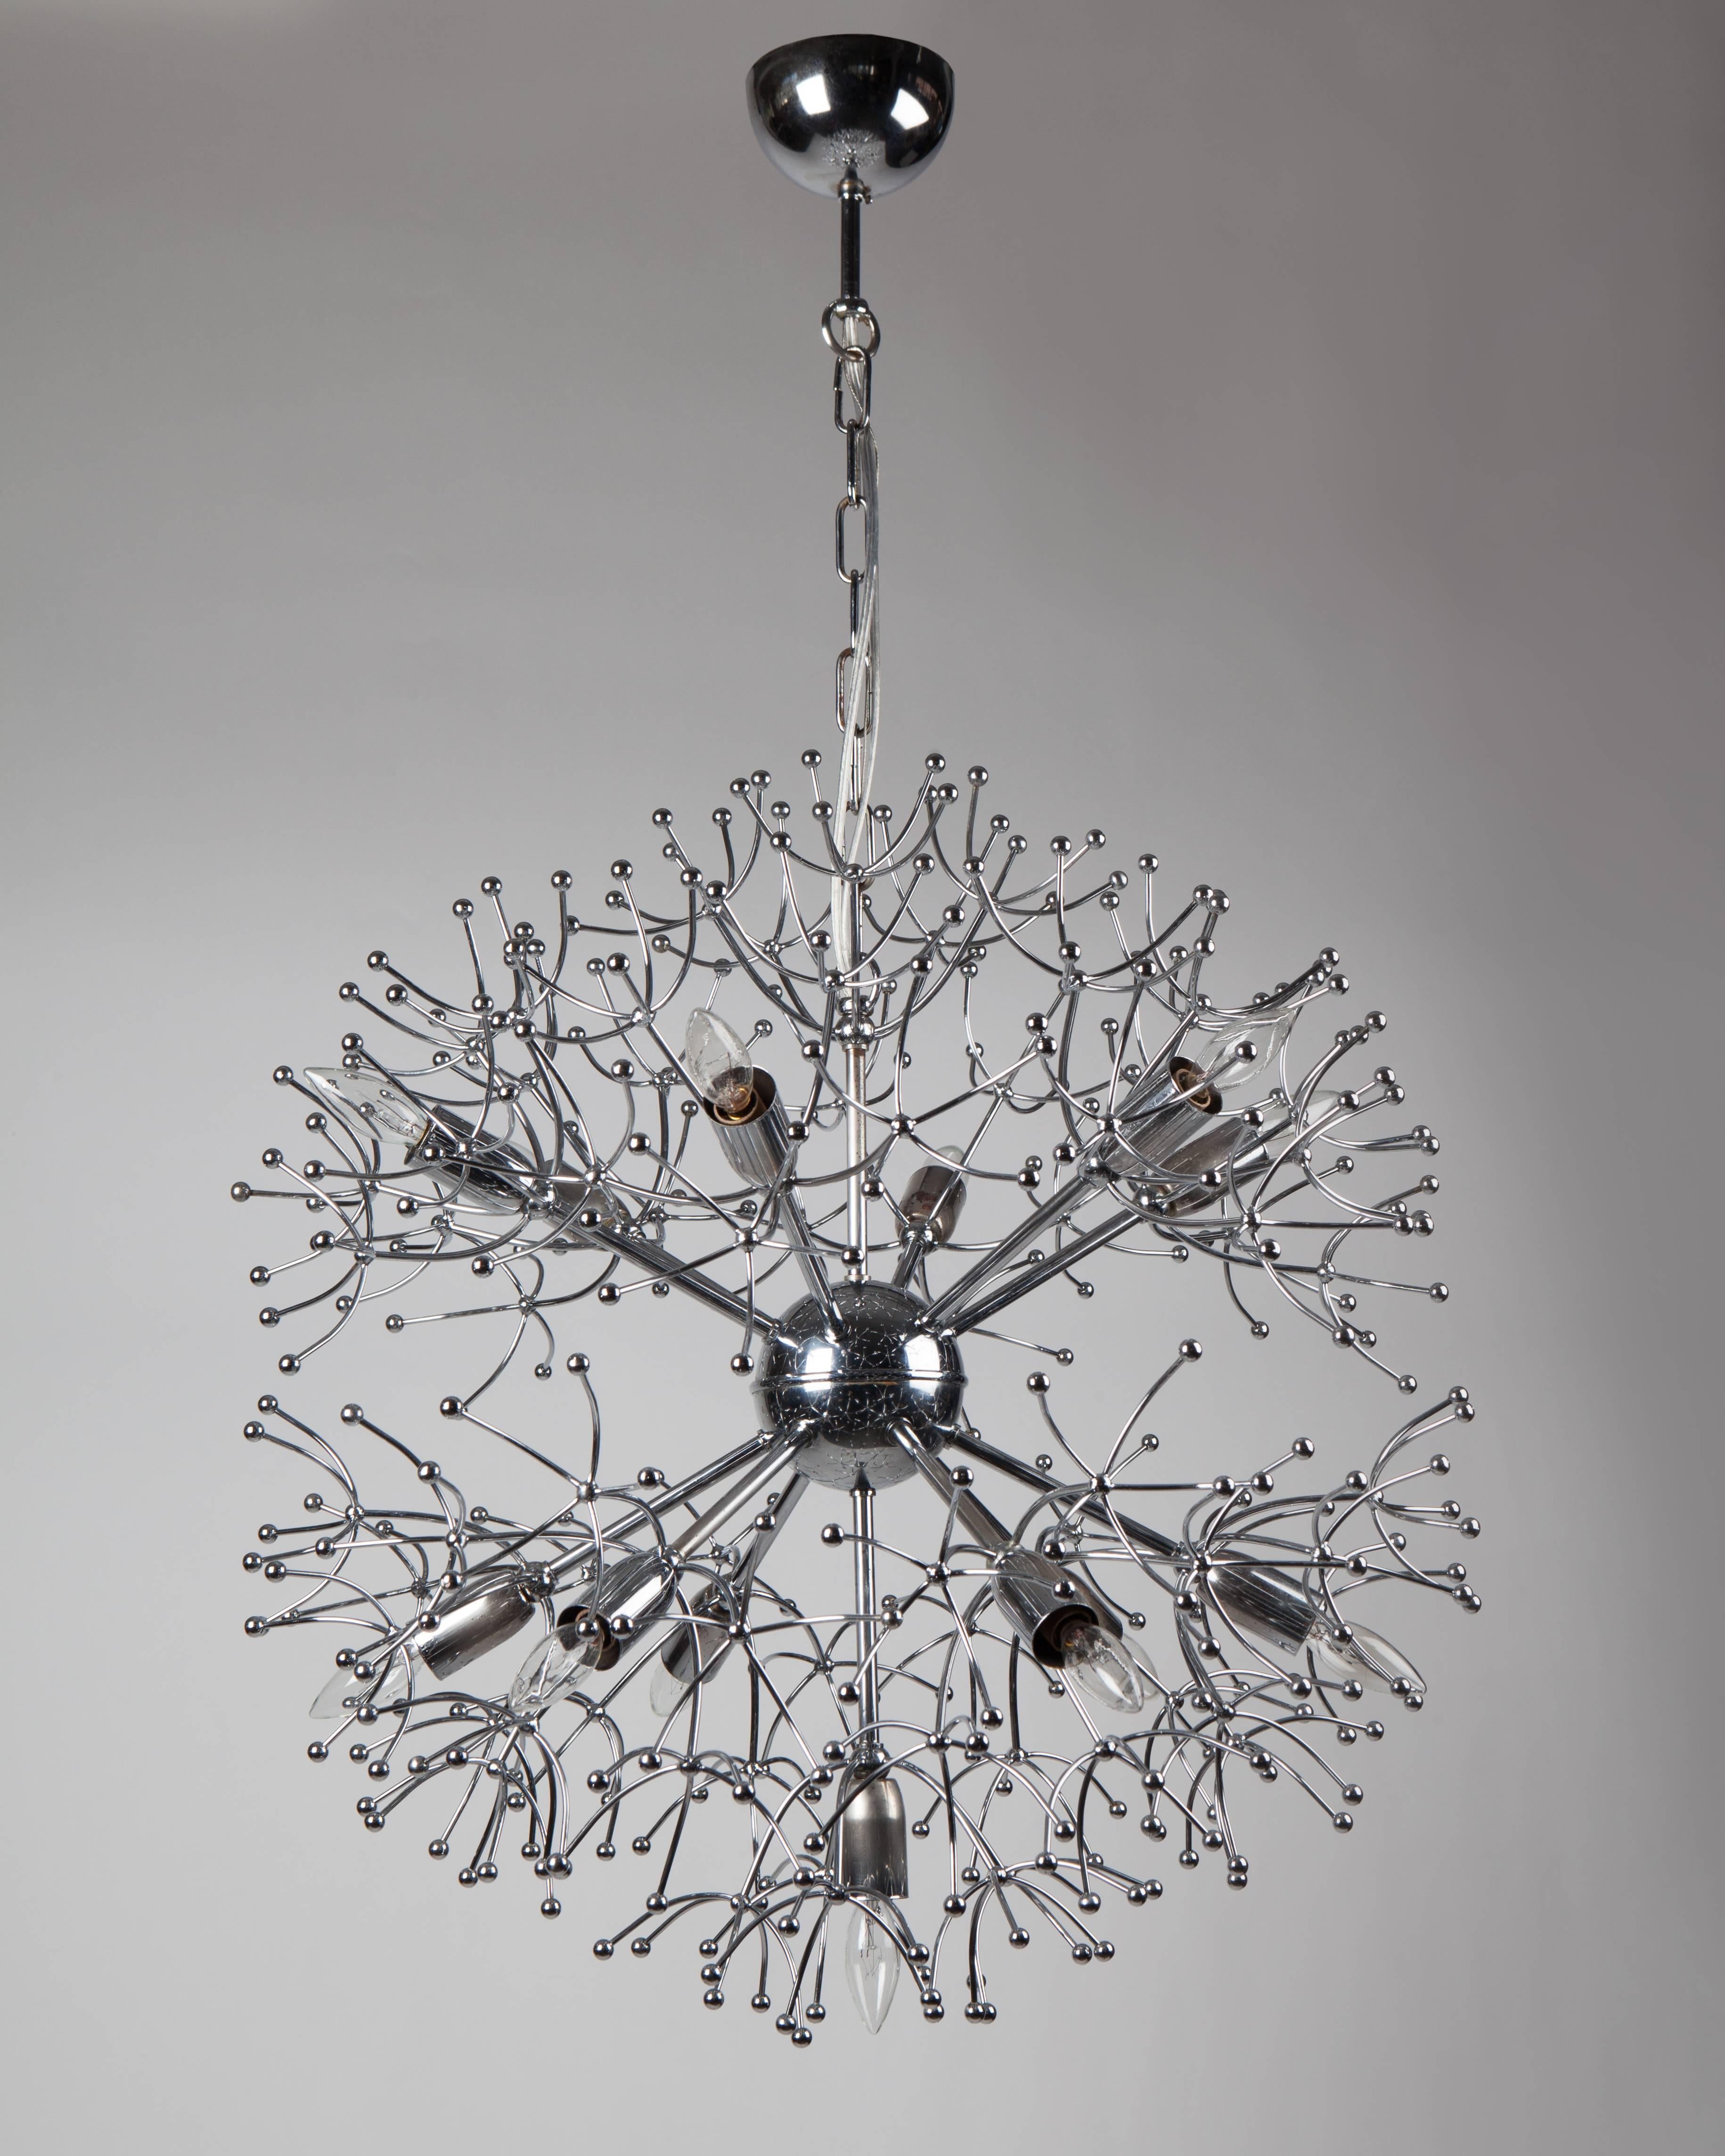 AHL3971.

A chrome Sputnik chandelier with small polished spheres at the tips of the arms. This Mid-Century Modern fixture is attributed to the Italian designer Gaetano Sciolari made in the 1970s.
 
Dimensions:
Current height: 37